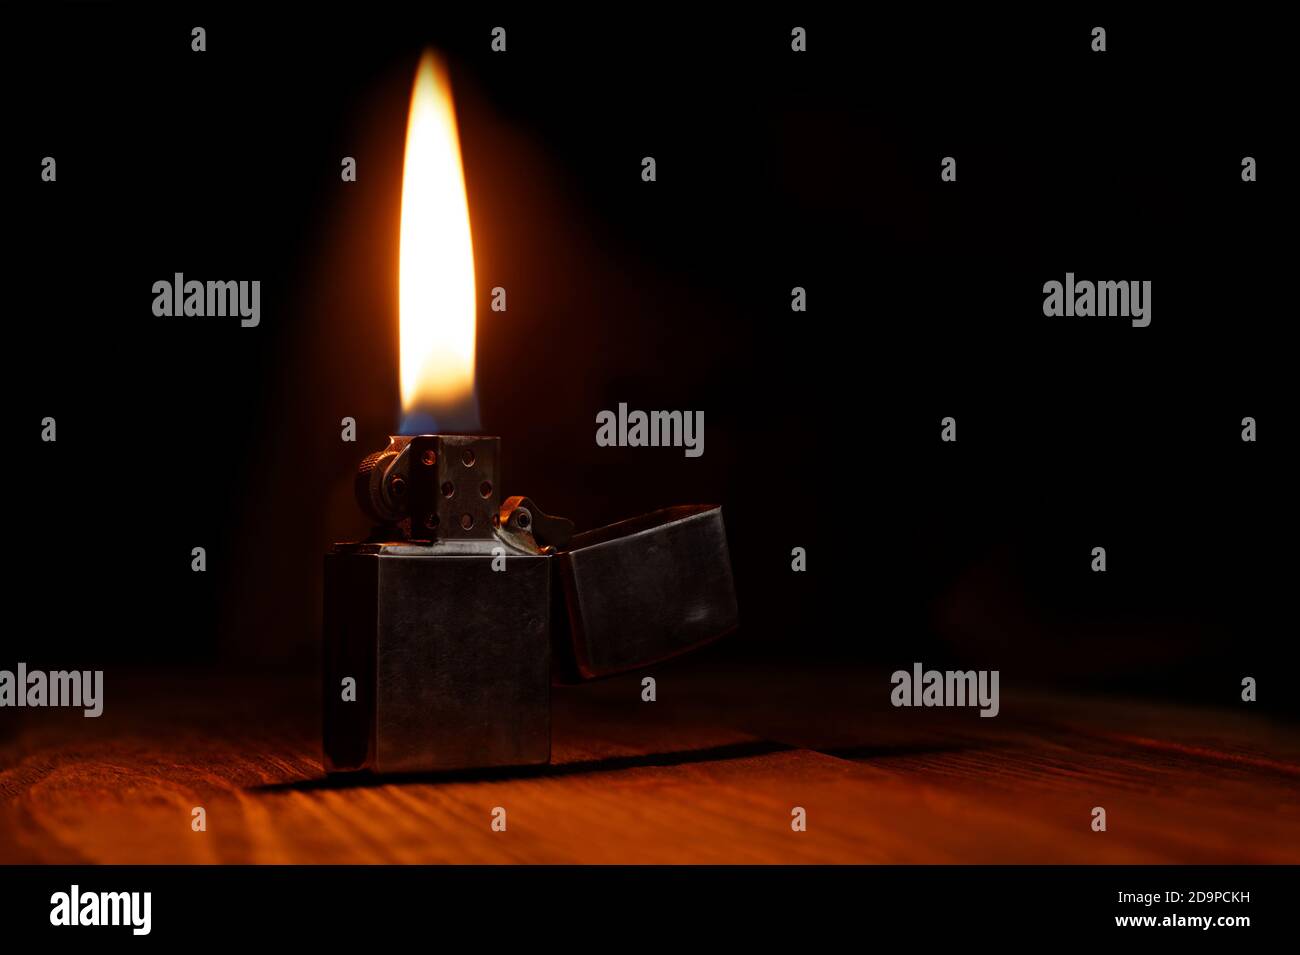 Old gasoline lighter with flame on wooden table against dark background Stock Photo